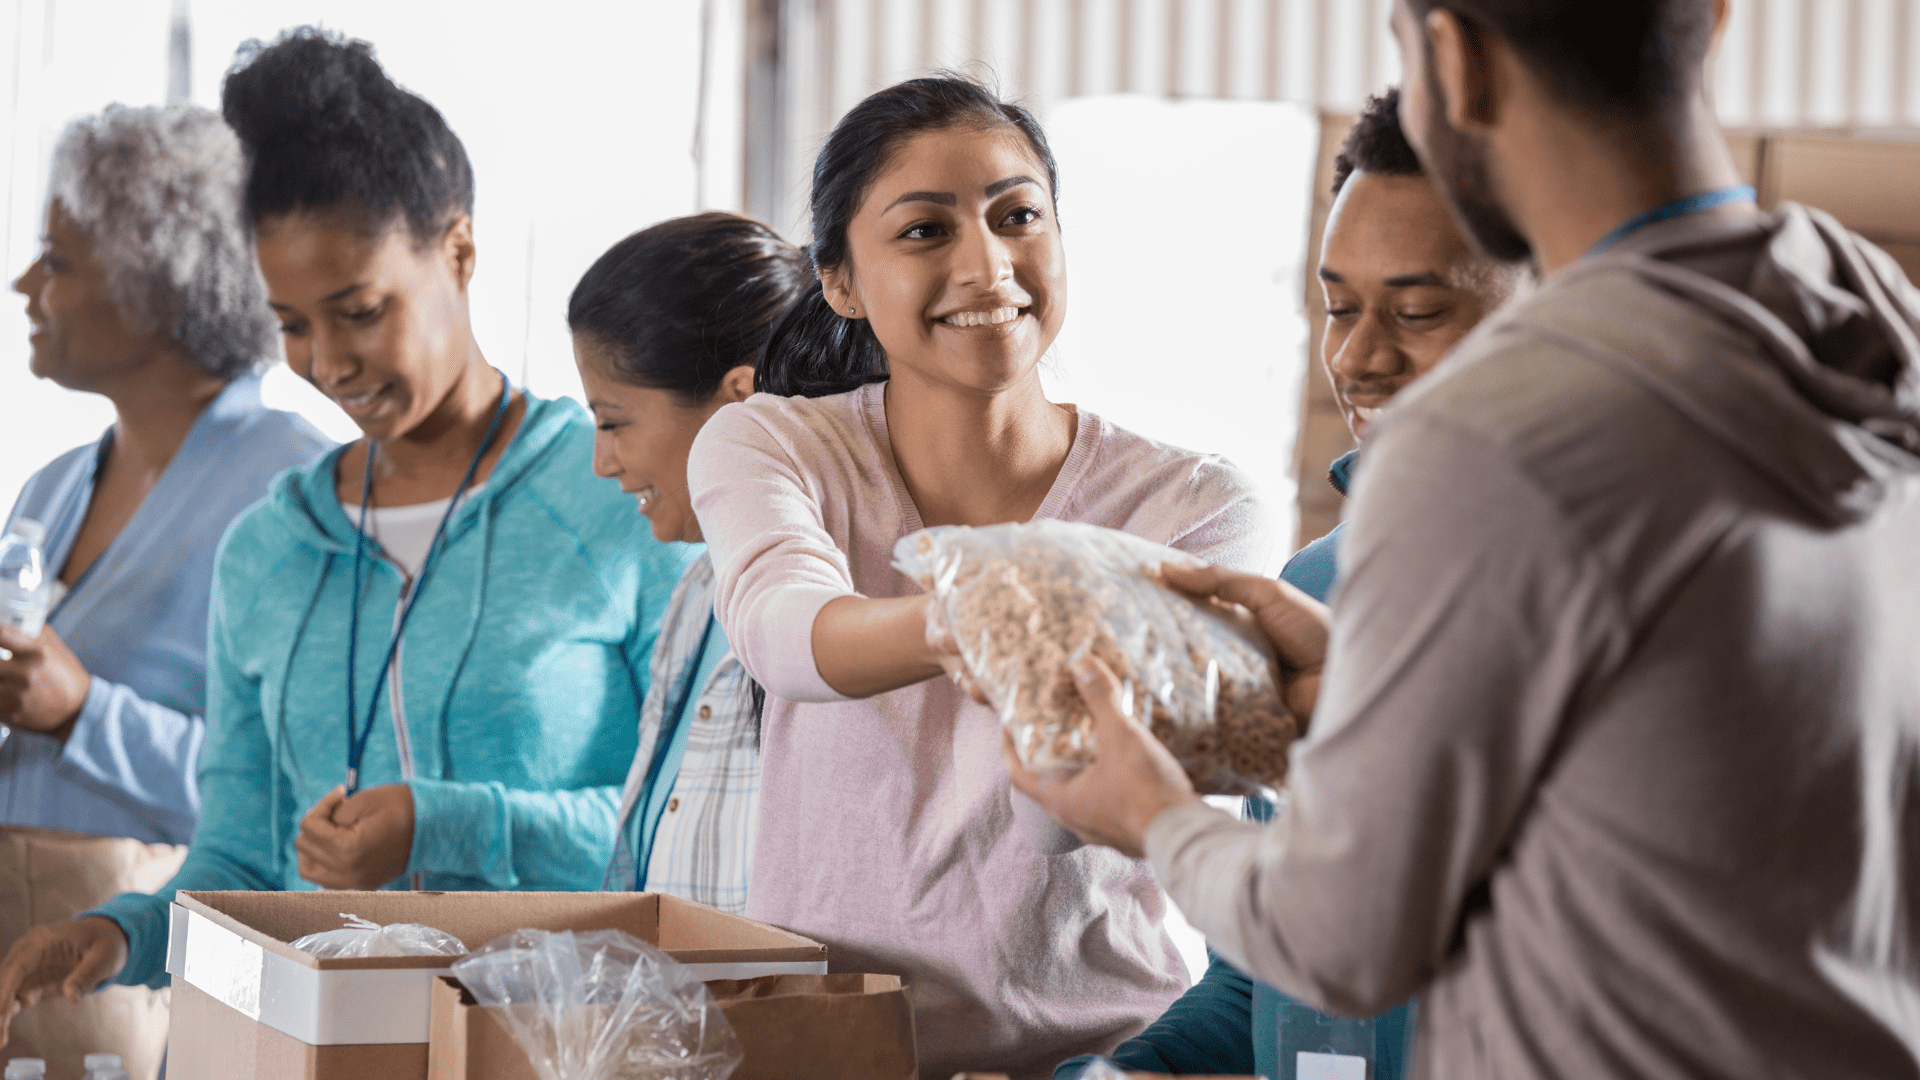 13 Ways to Encourage Your Church Members to Give Back to Your Community